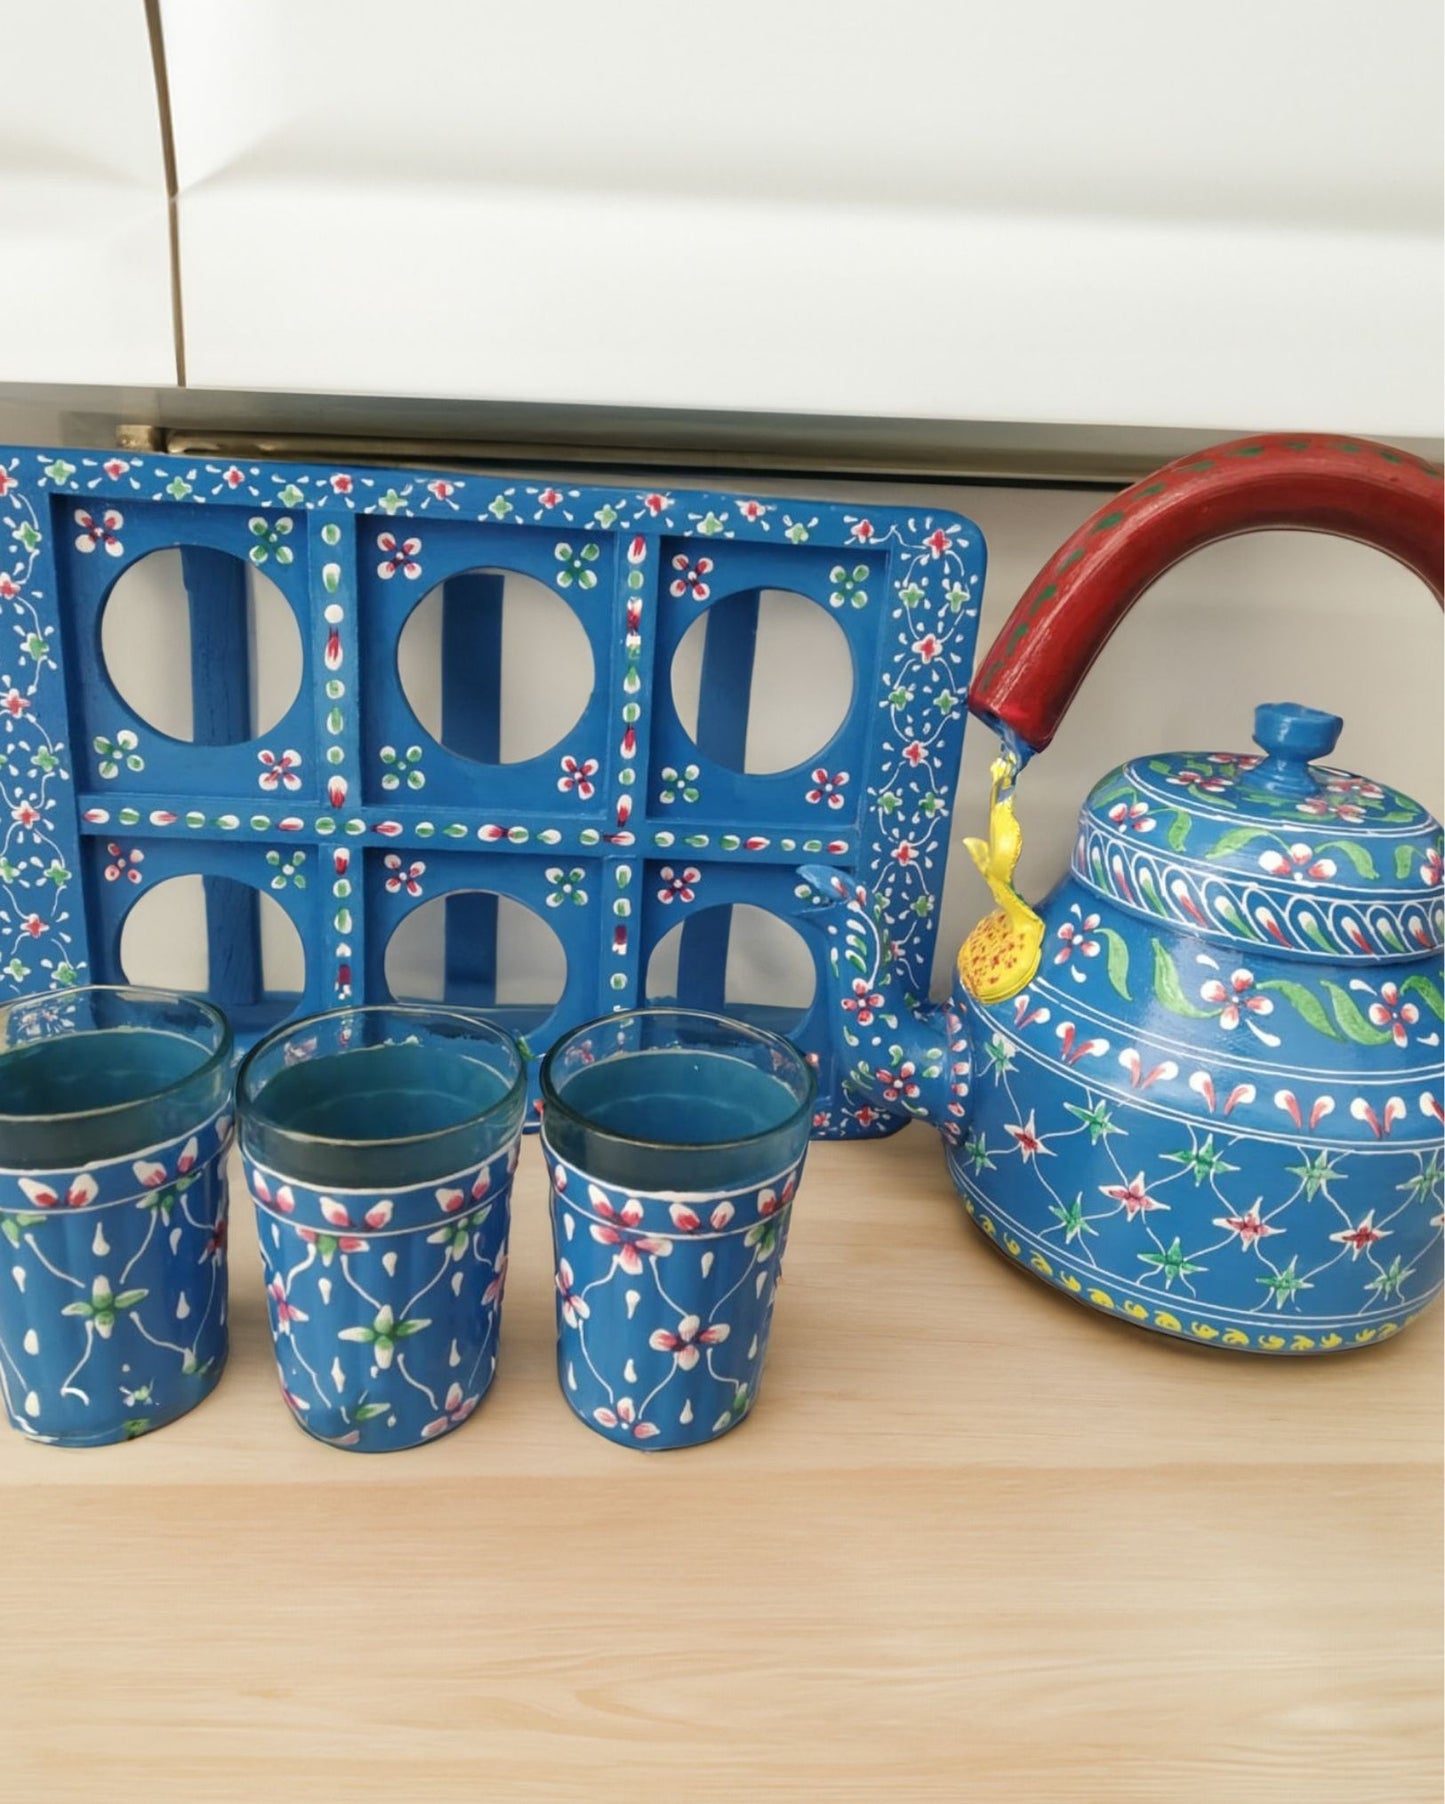 2012-Hand Painted Blue coloured Aluminium Tea Kettle With 6 Glasses And Wooden Kart